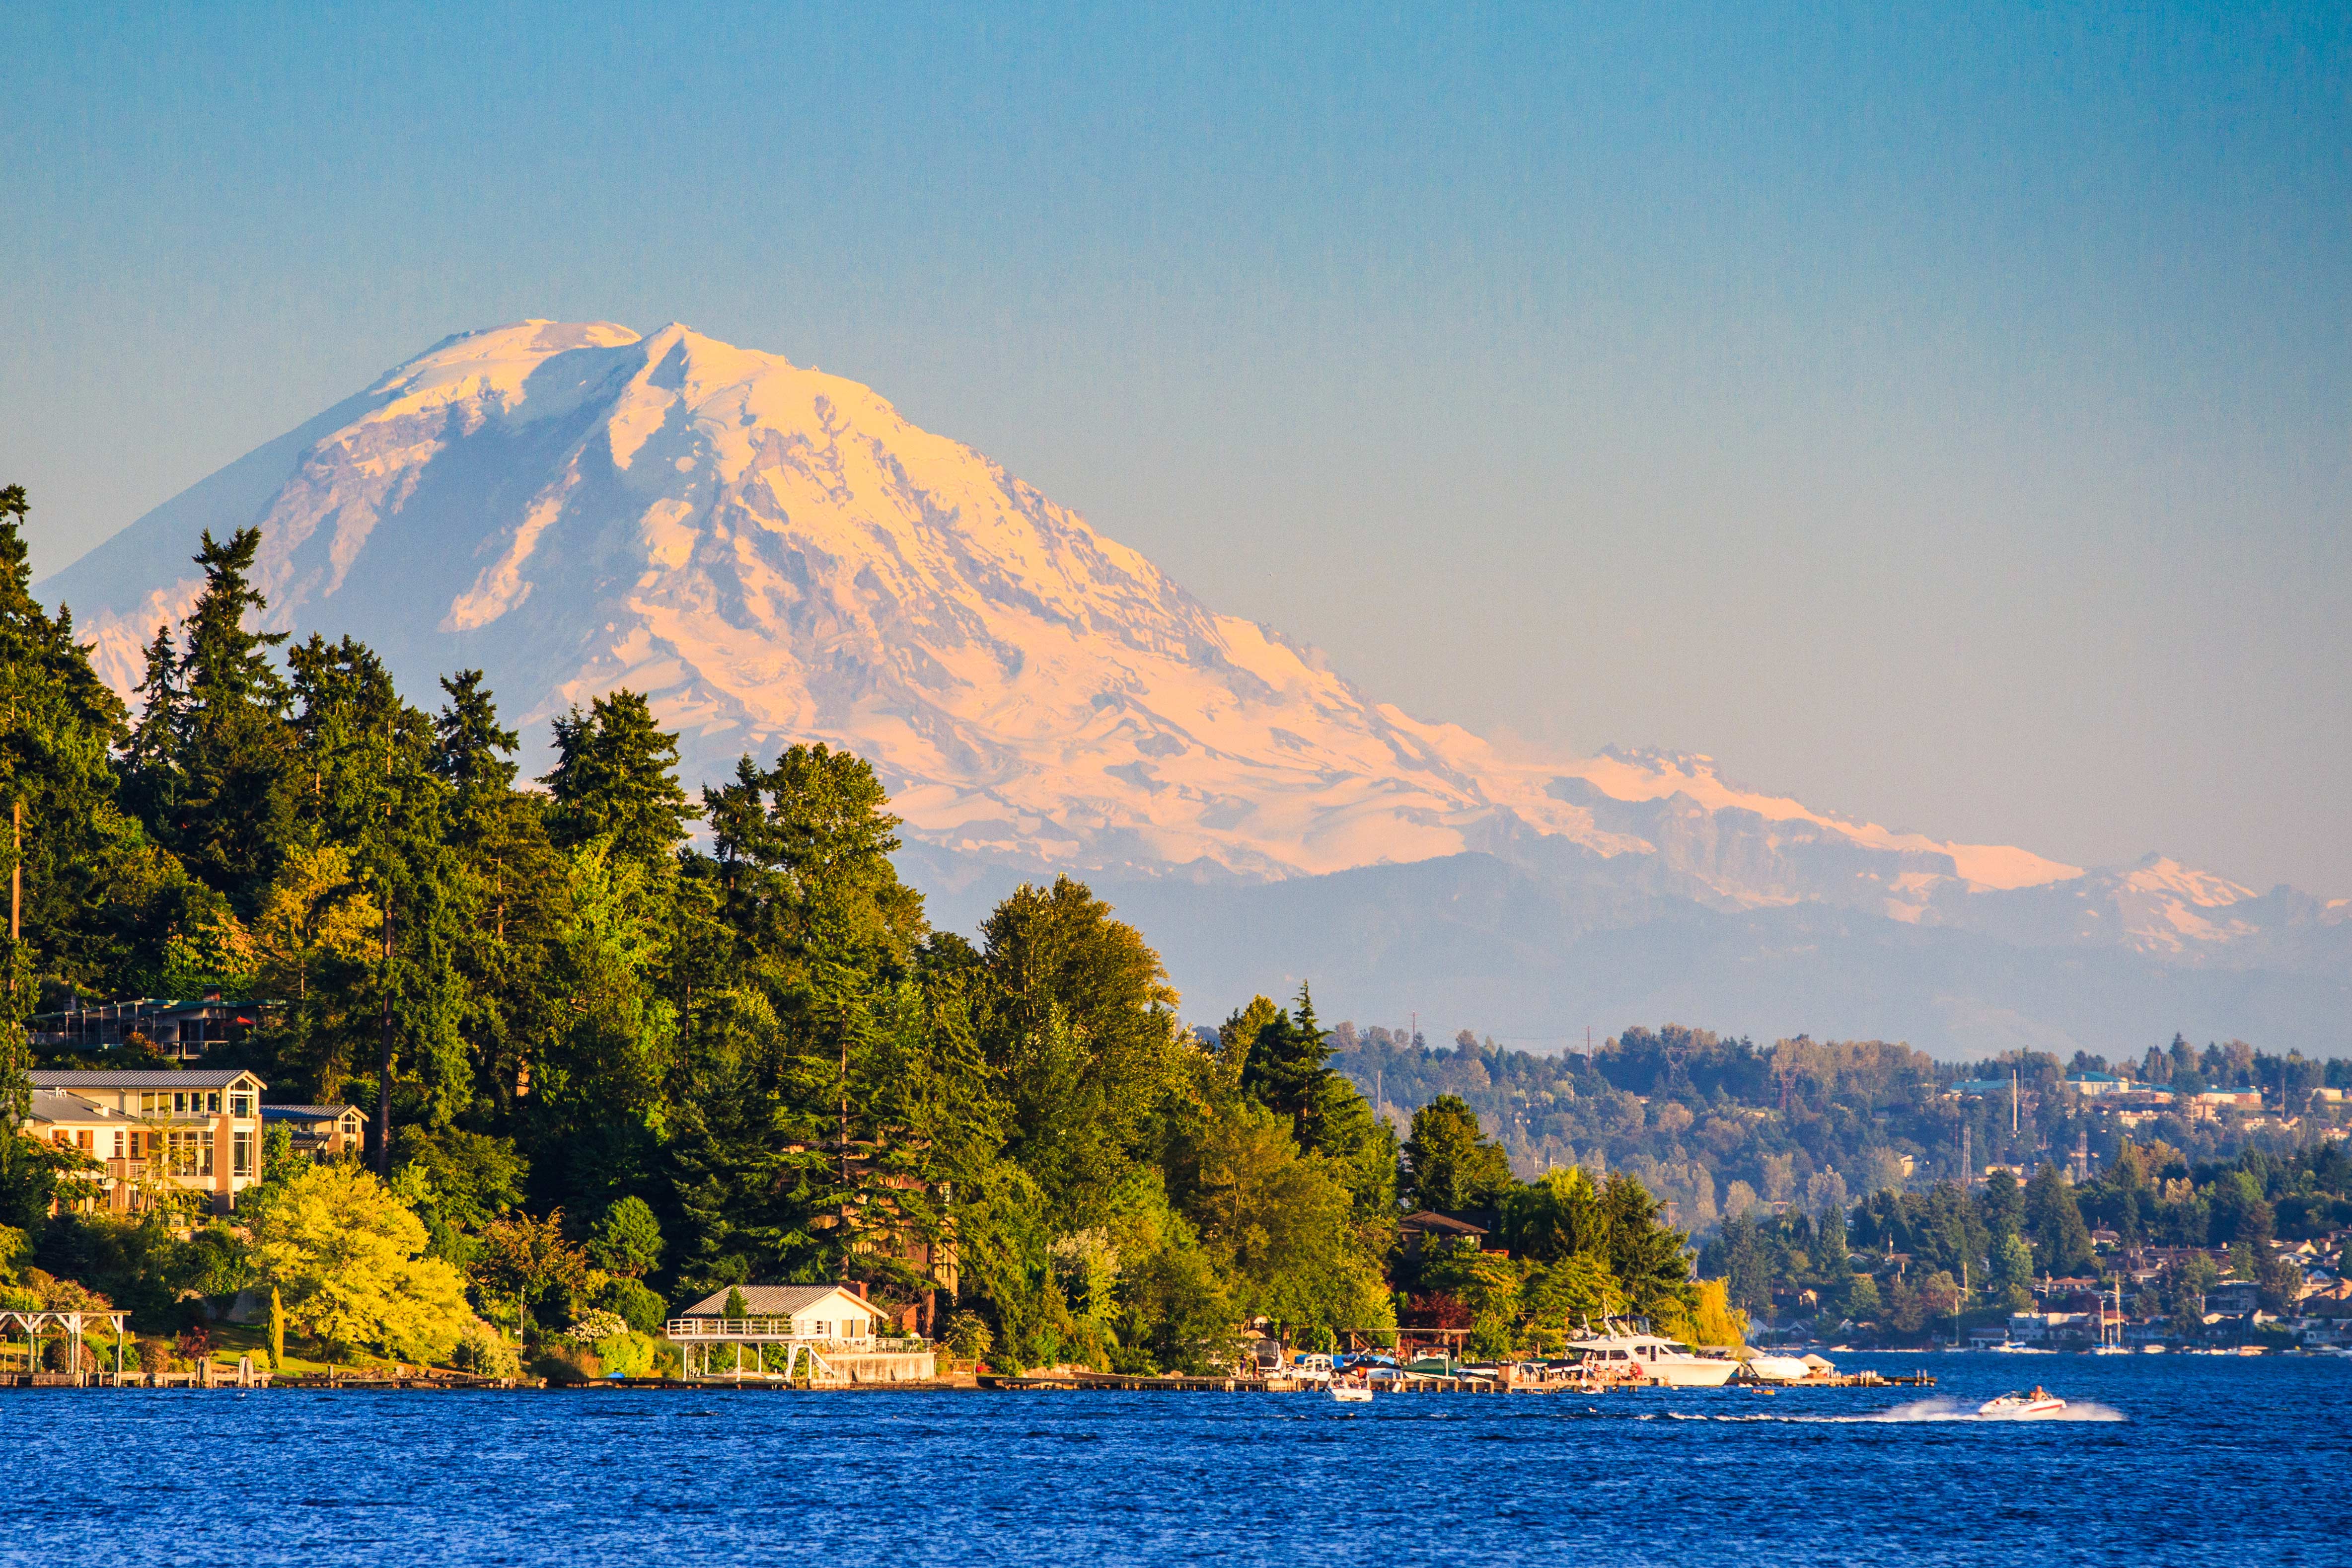 Mt Rainier and Lake Washington at sunset. Image by Feng Wei Photography / Movement / Getty